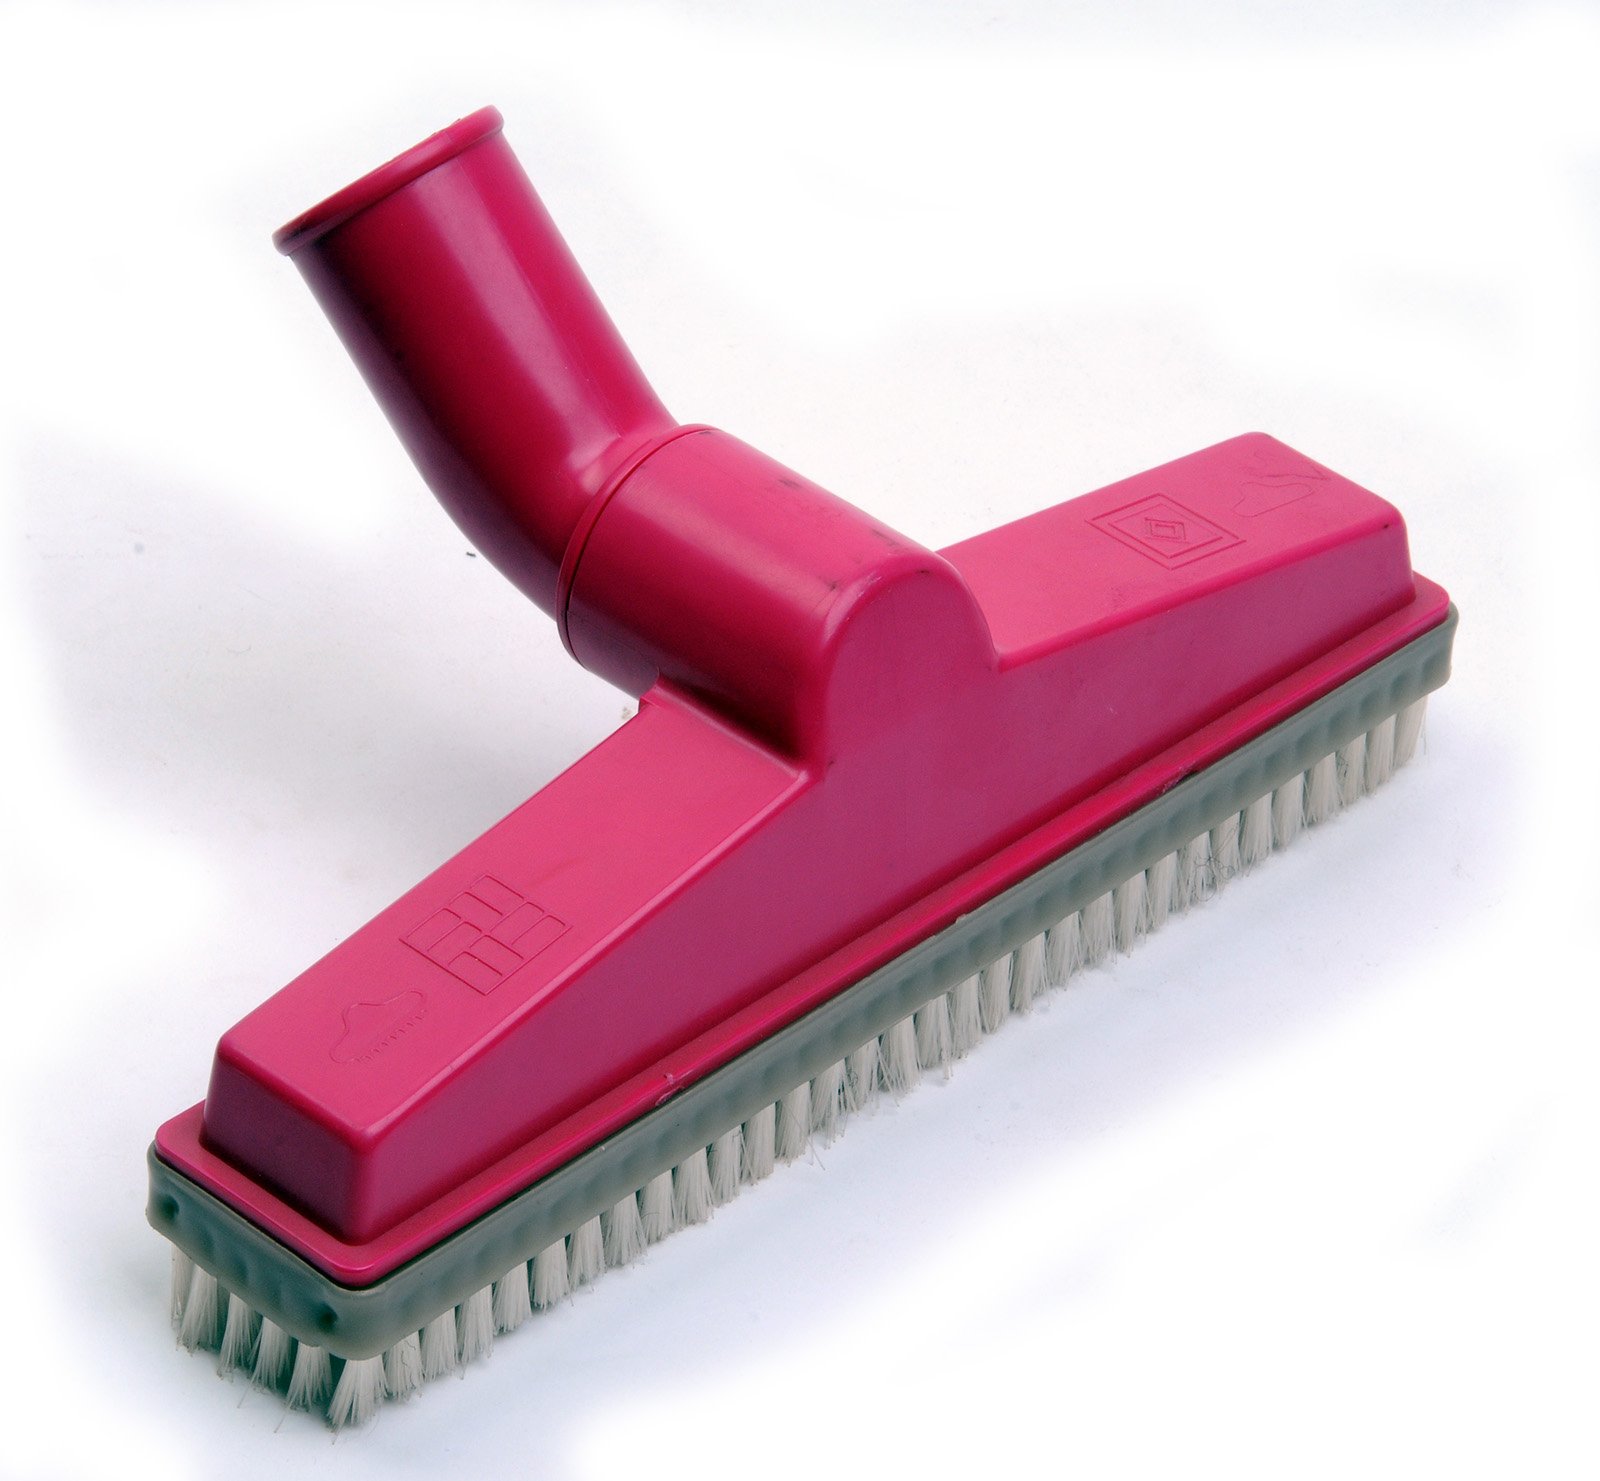 previous: brush cleaner